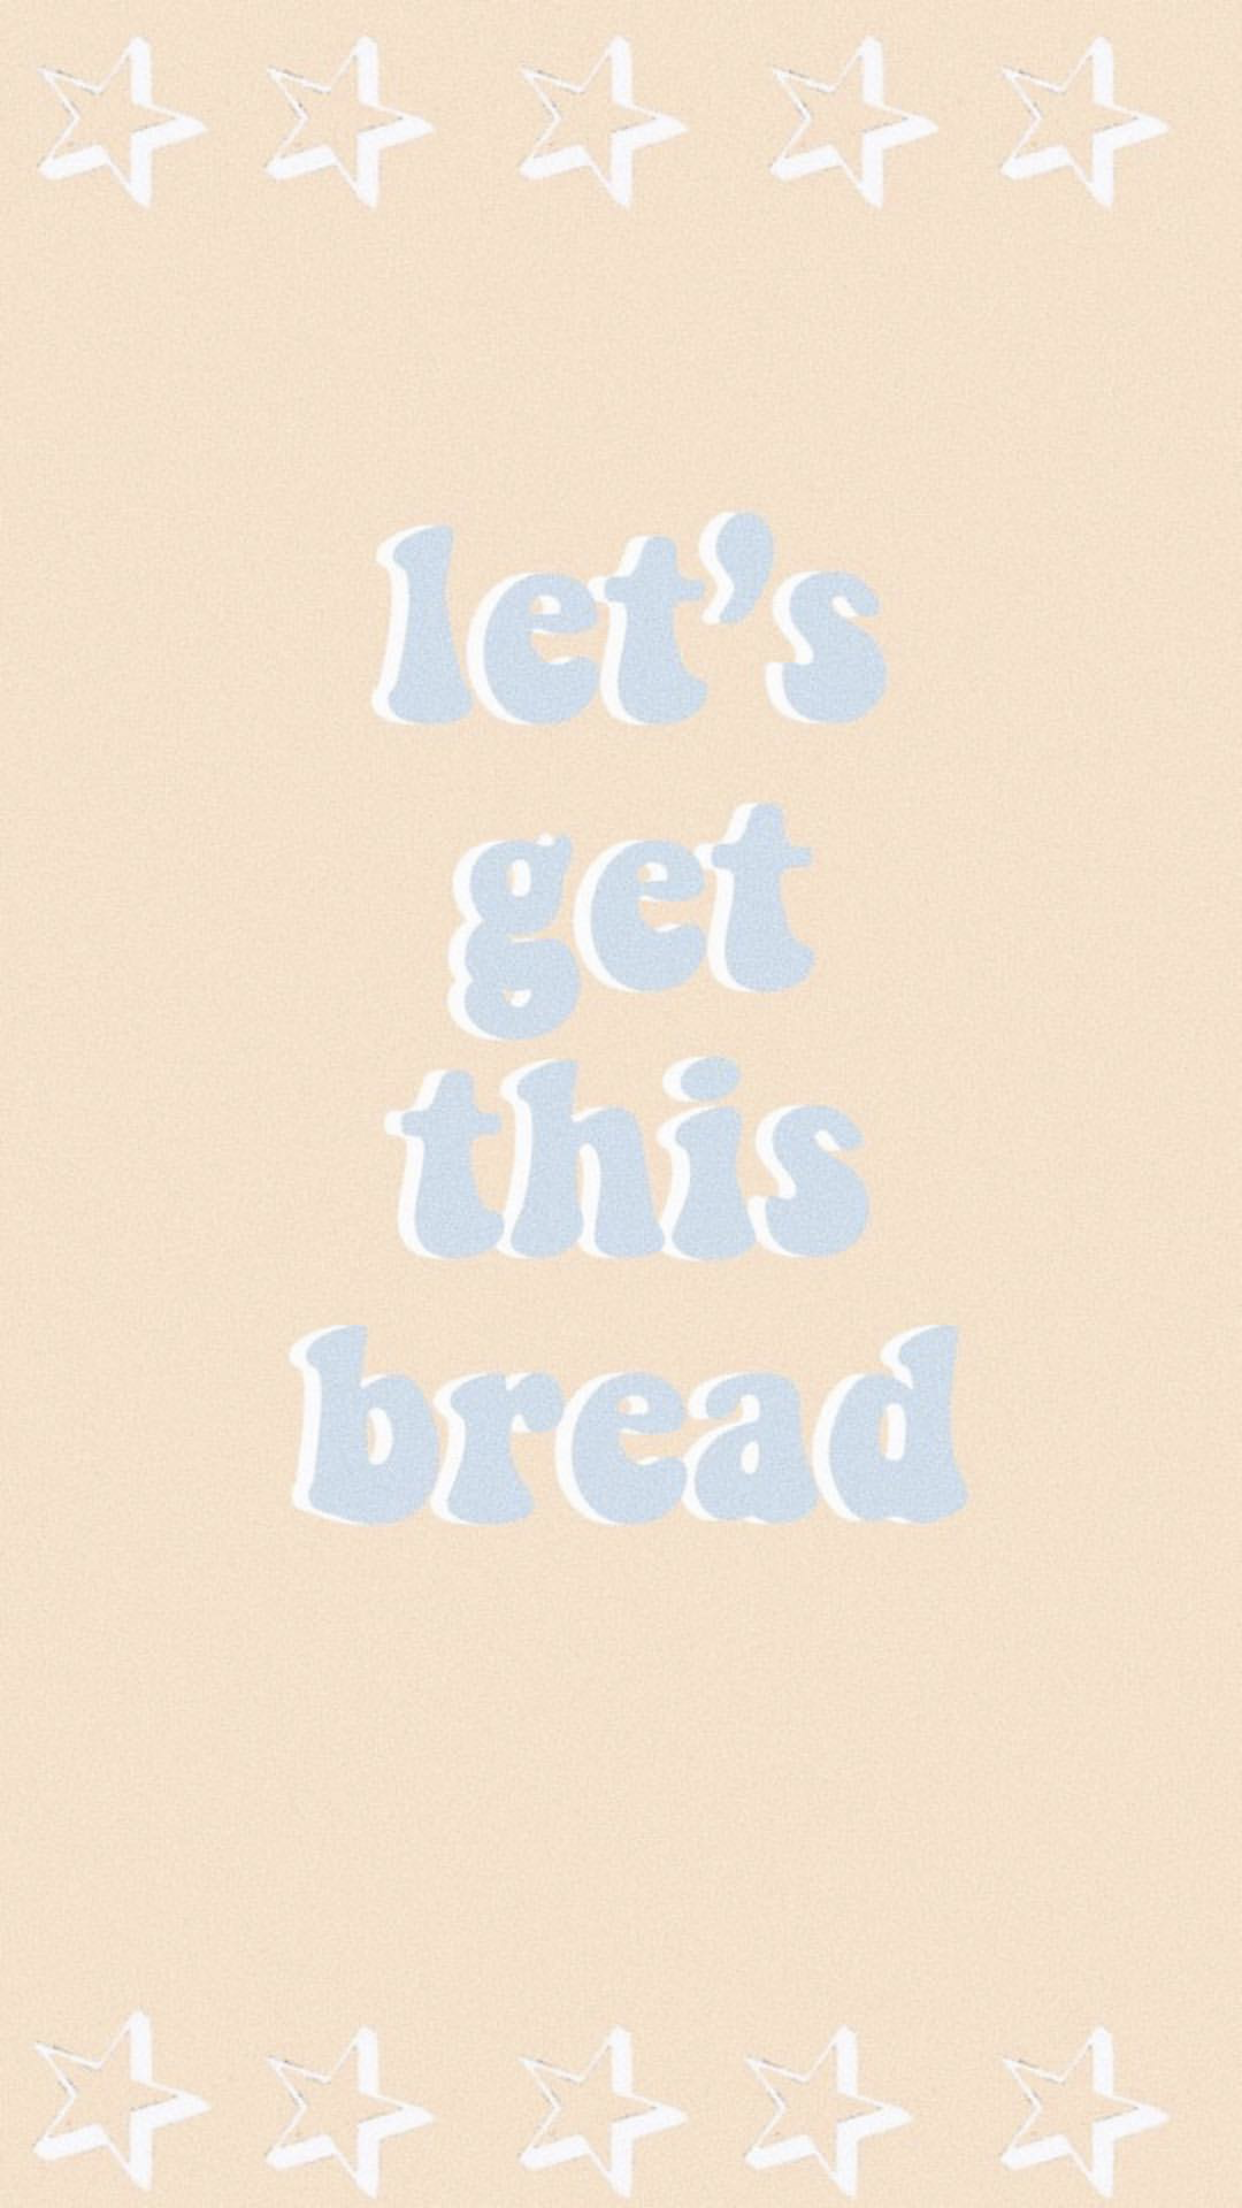 Bread quotes tumblr Let s get this bread wallpaper words wallpaper